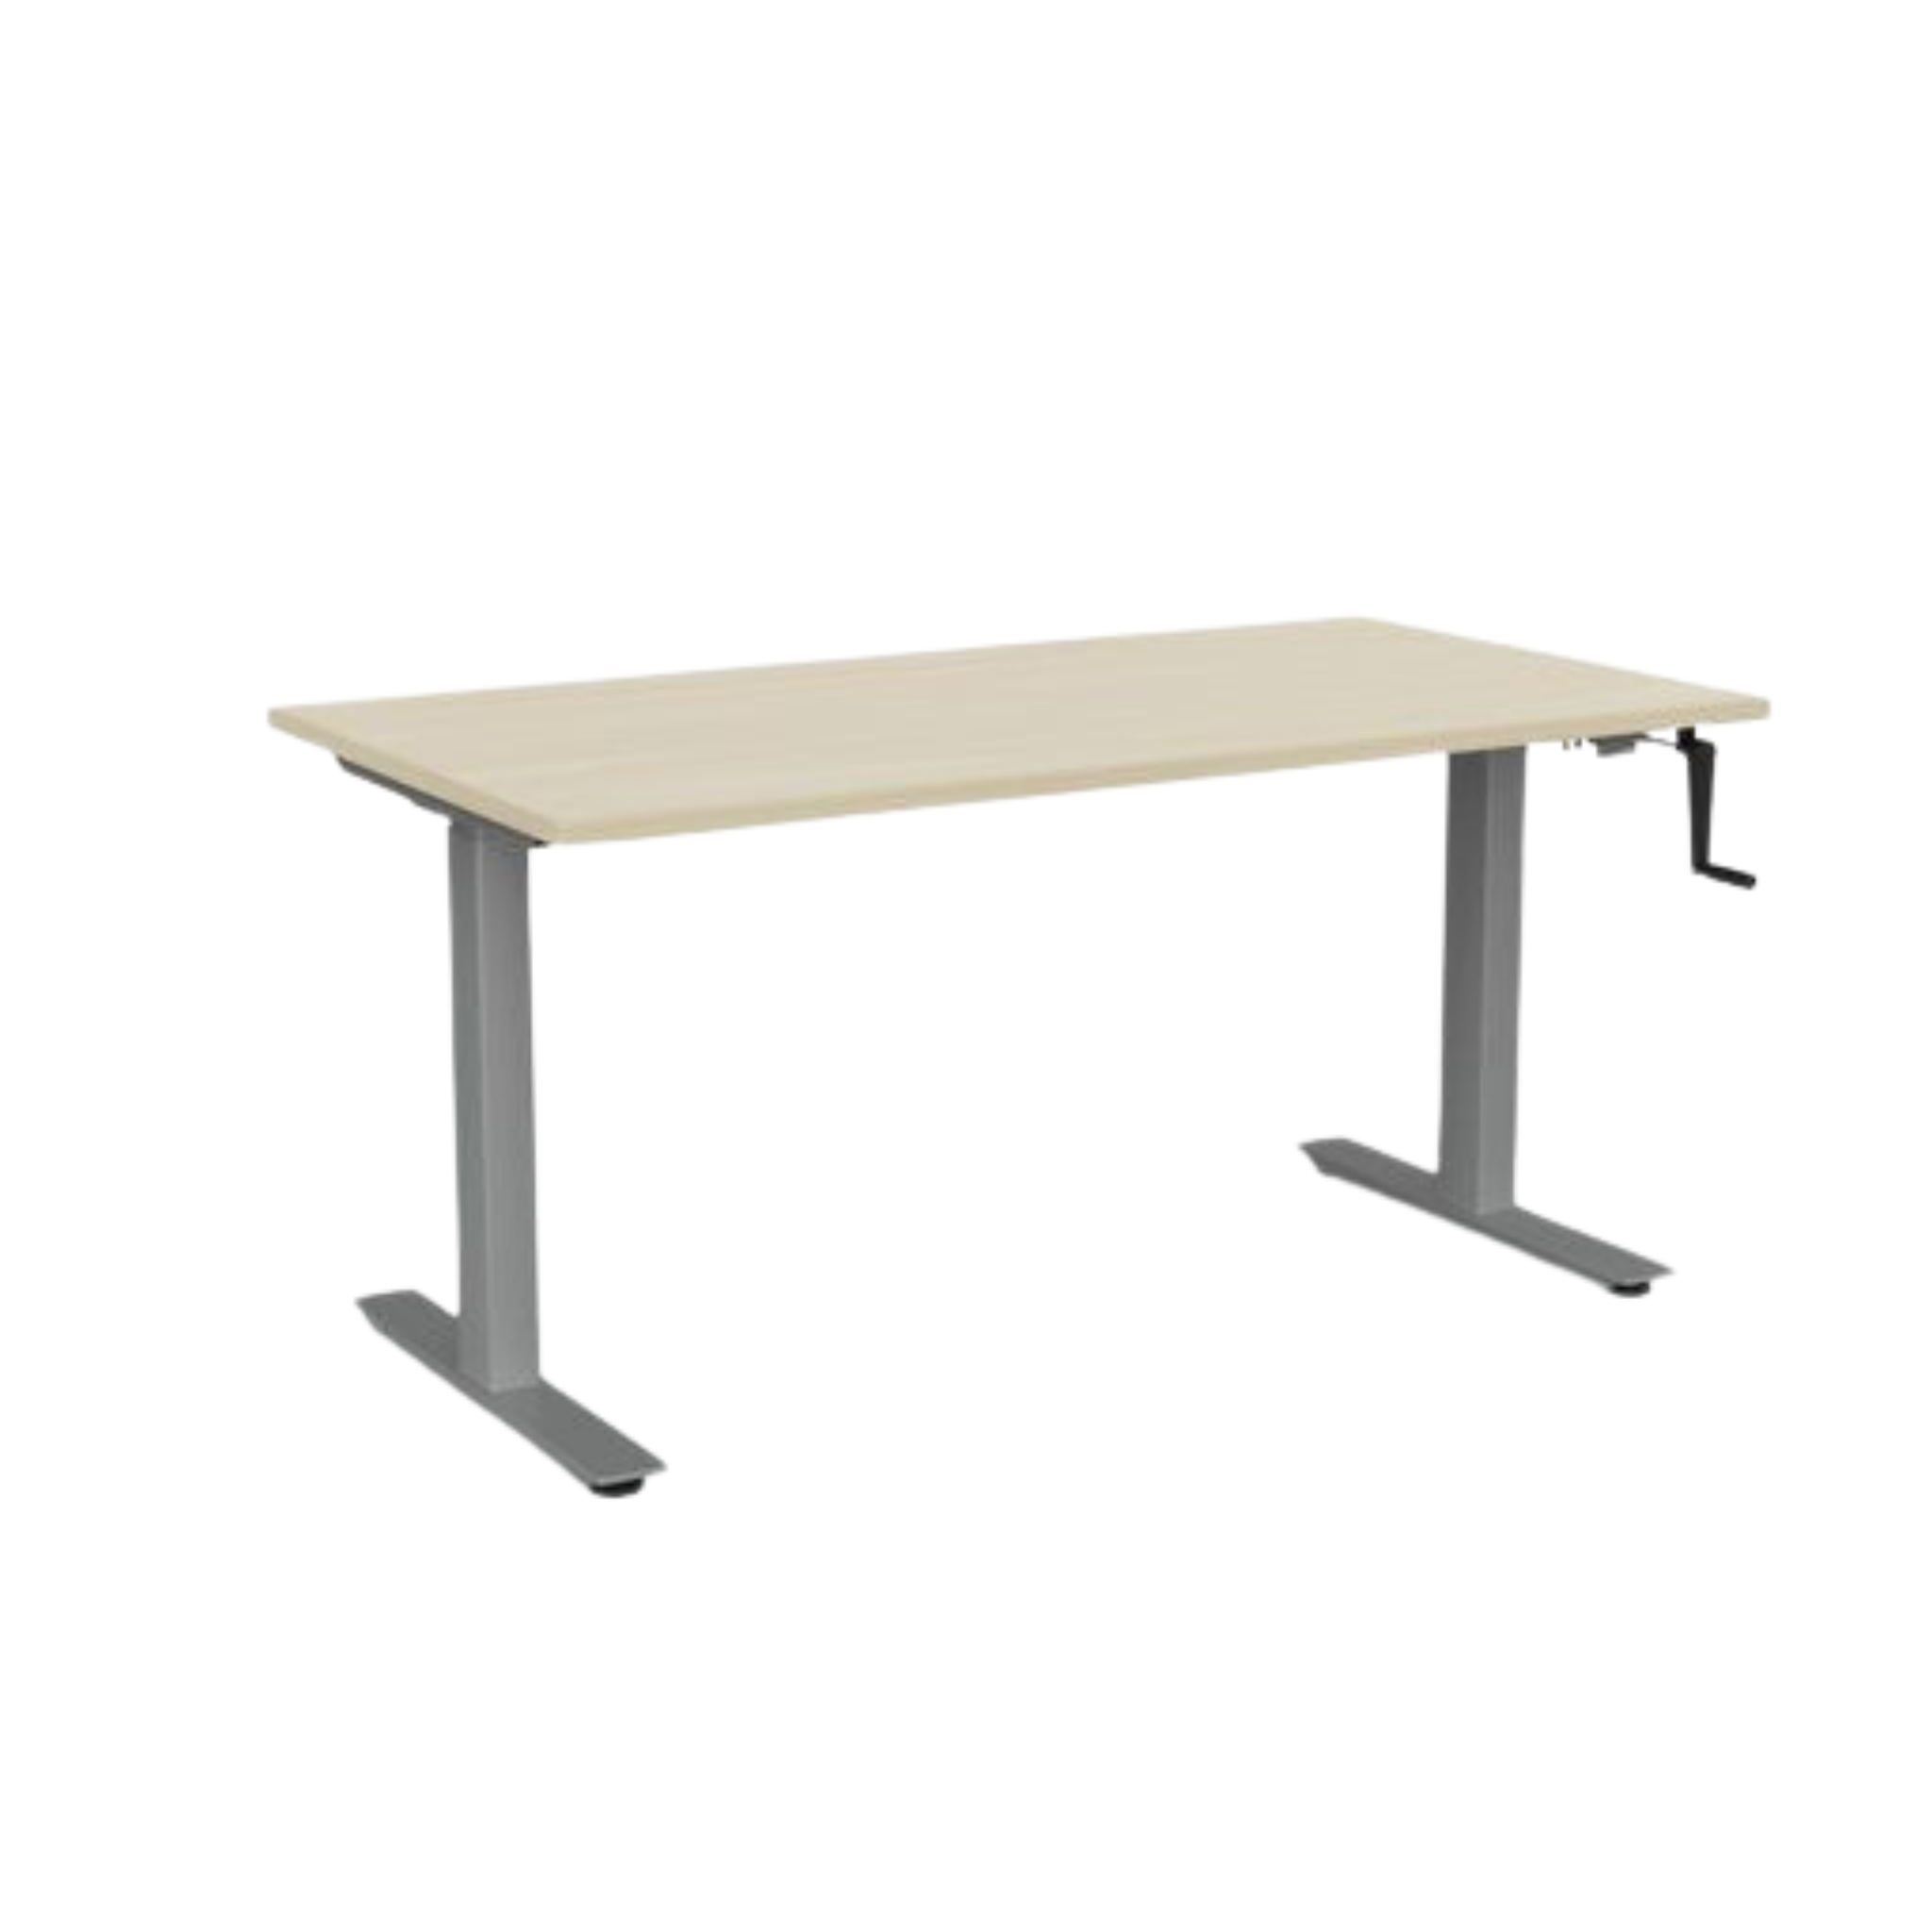 Agile winder sit to stand desk with silver frame and nordic maple top